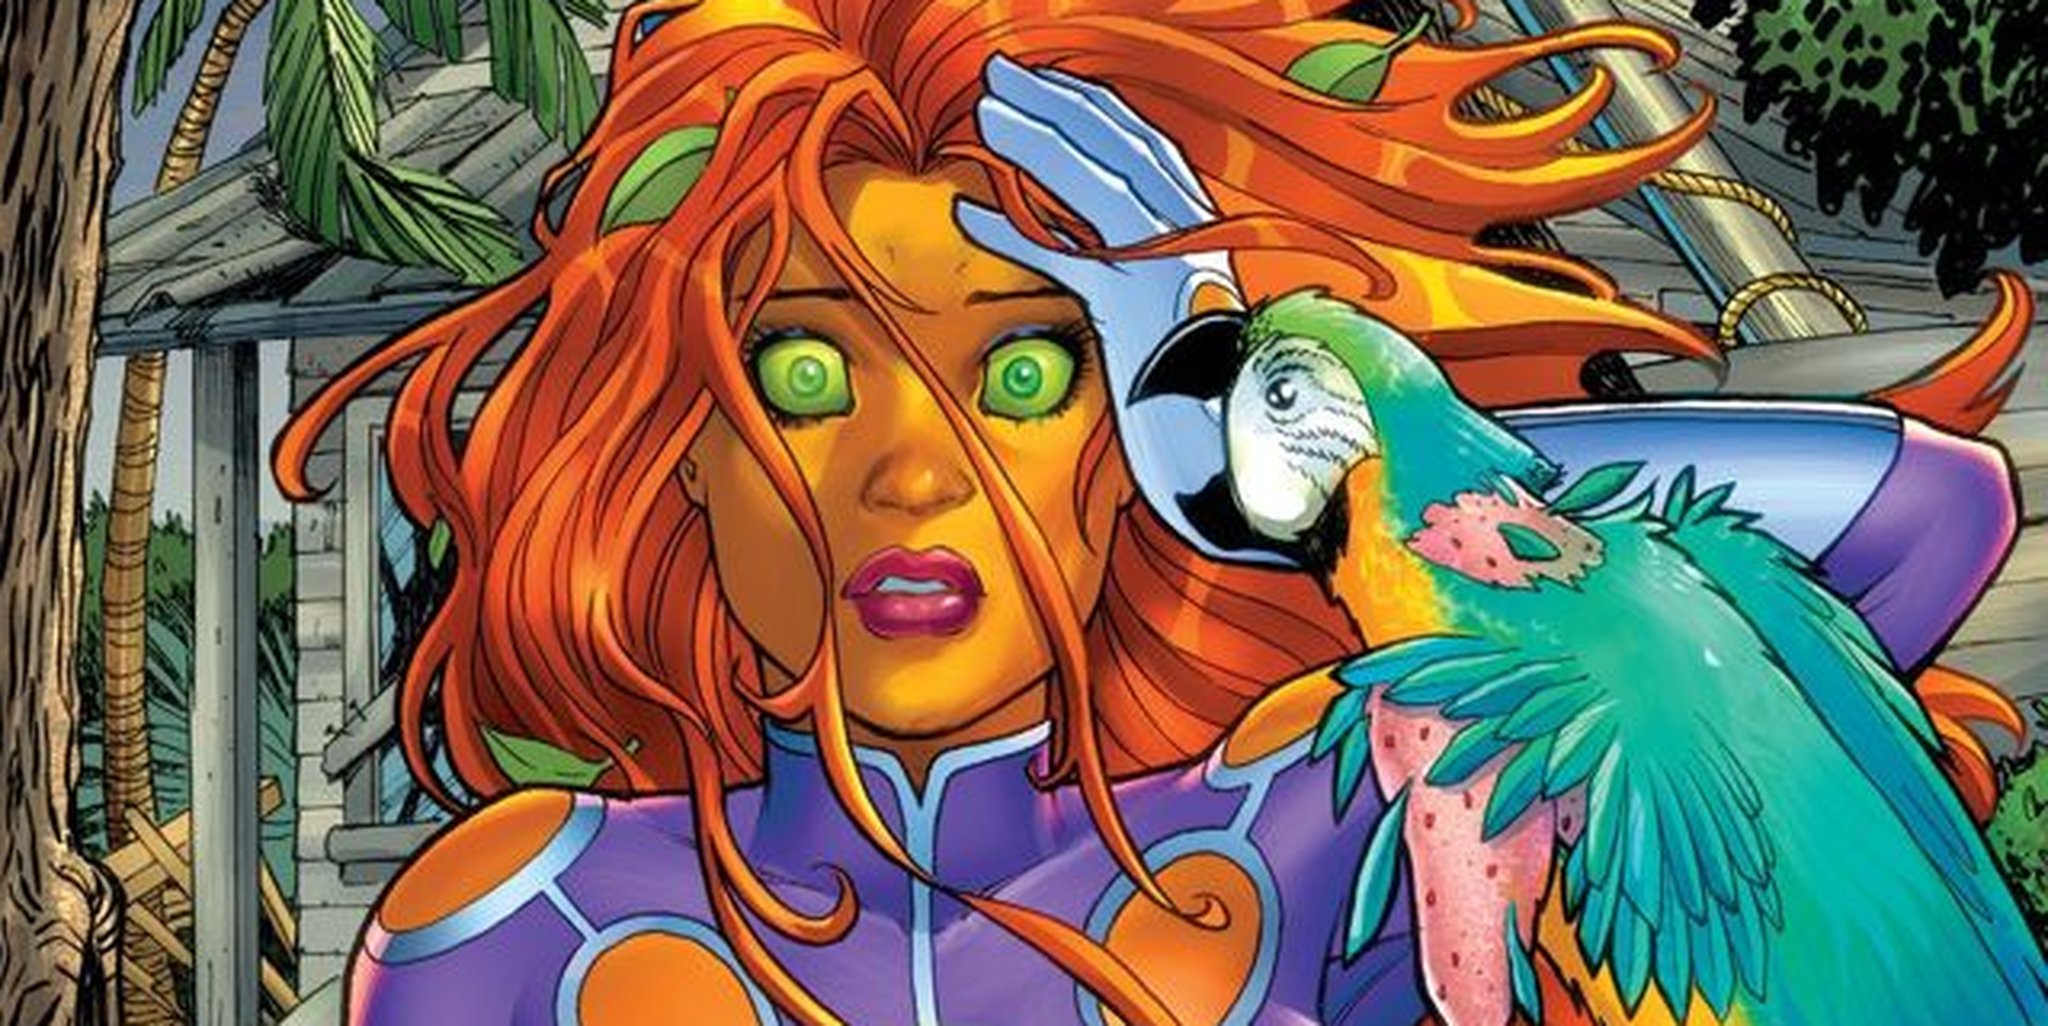 is comics new starfire series getting the character all wrong